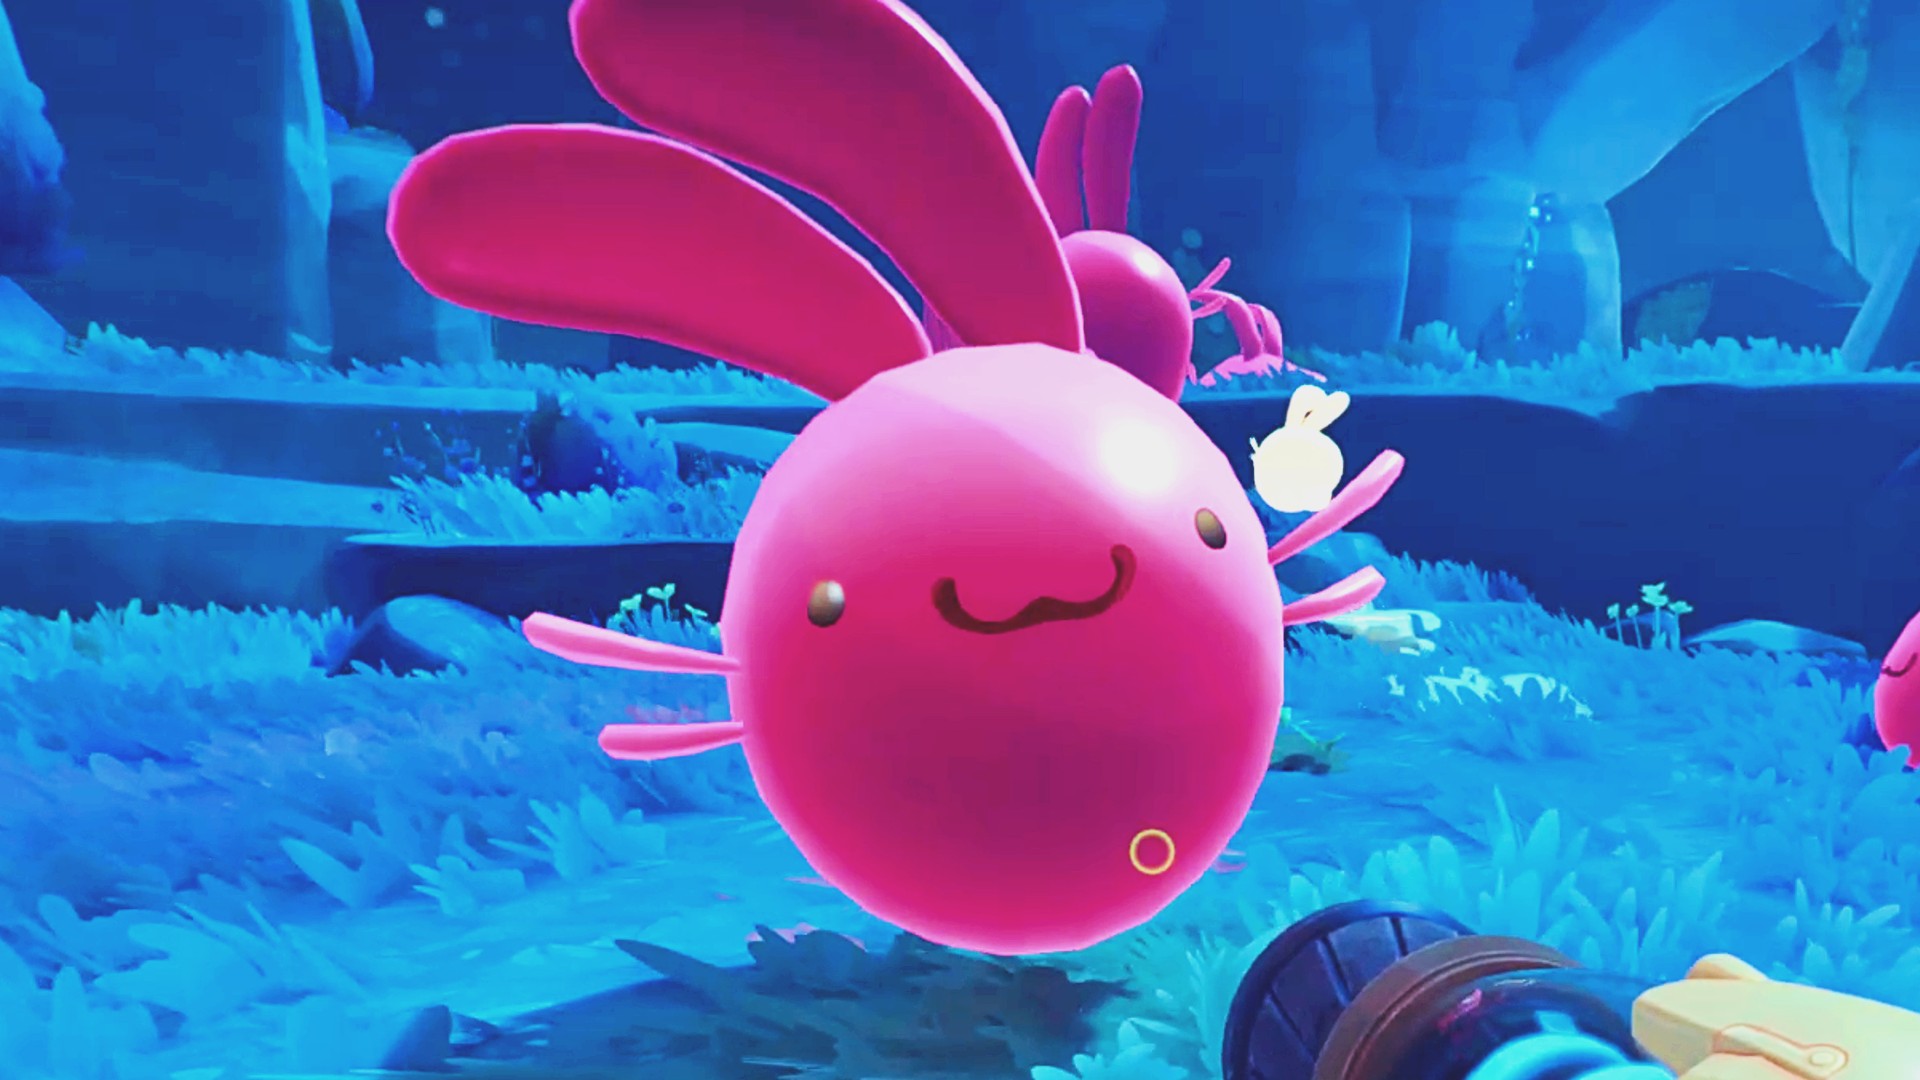 Slime Rancher 2 Reveals Come Rain Or Slime Update